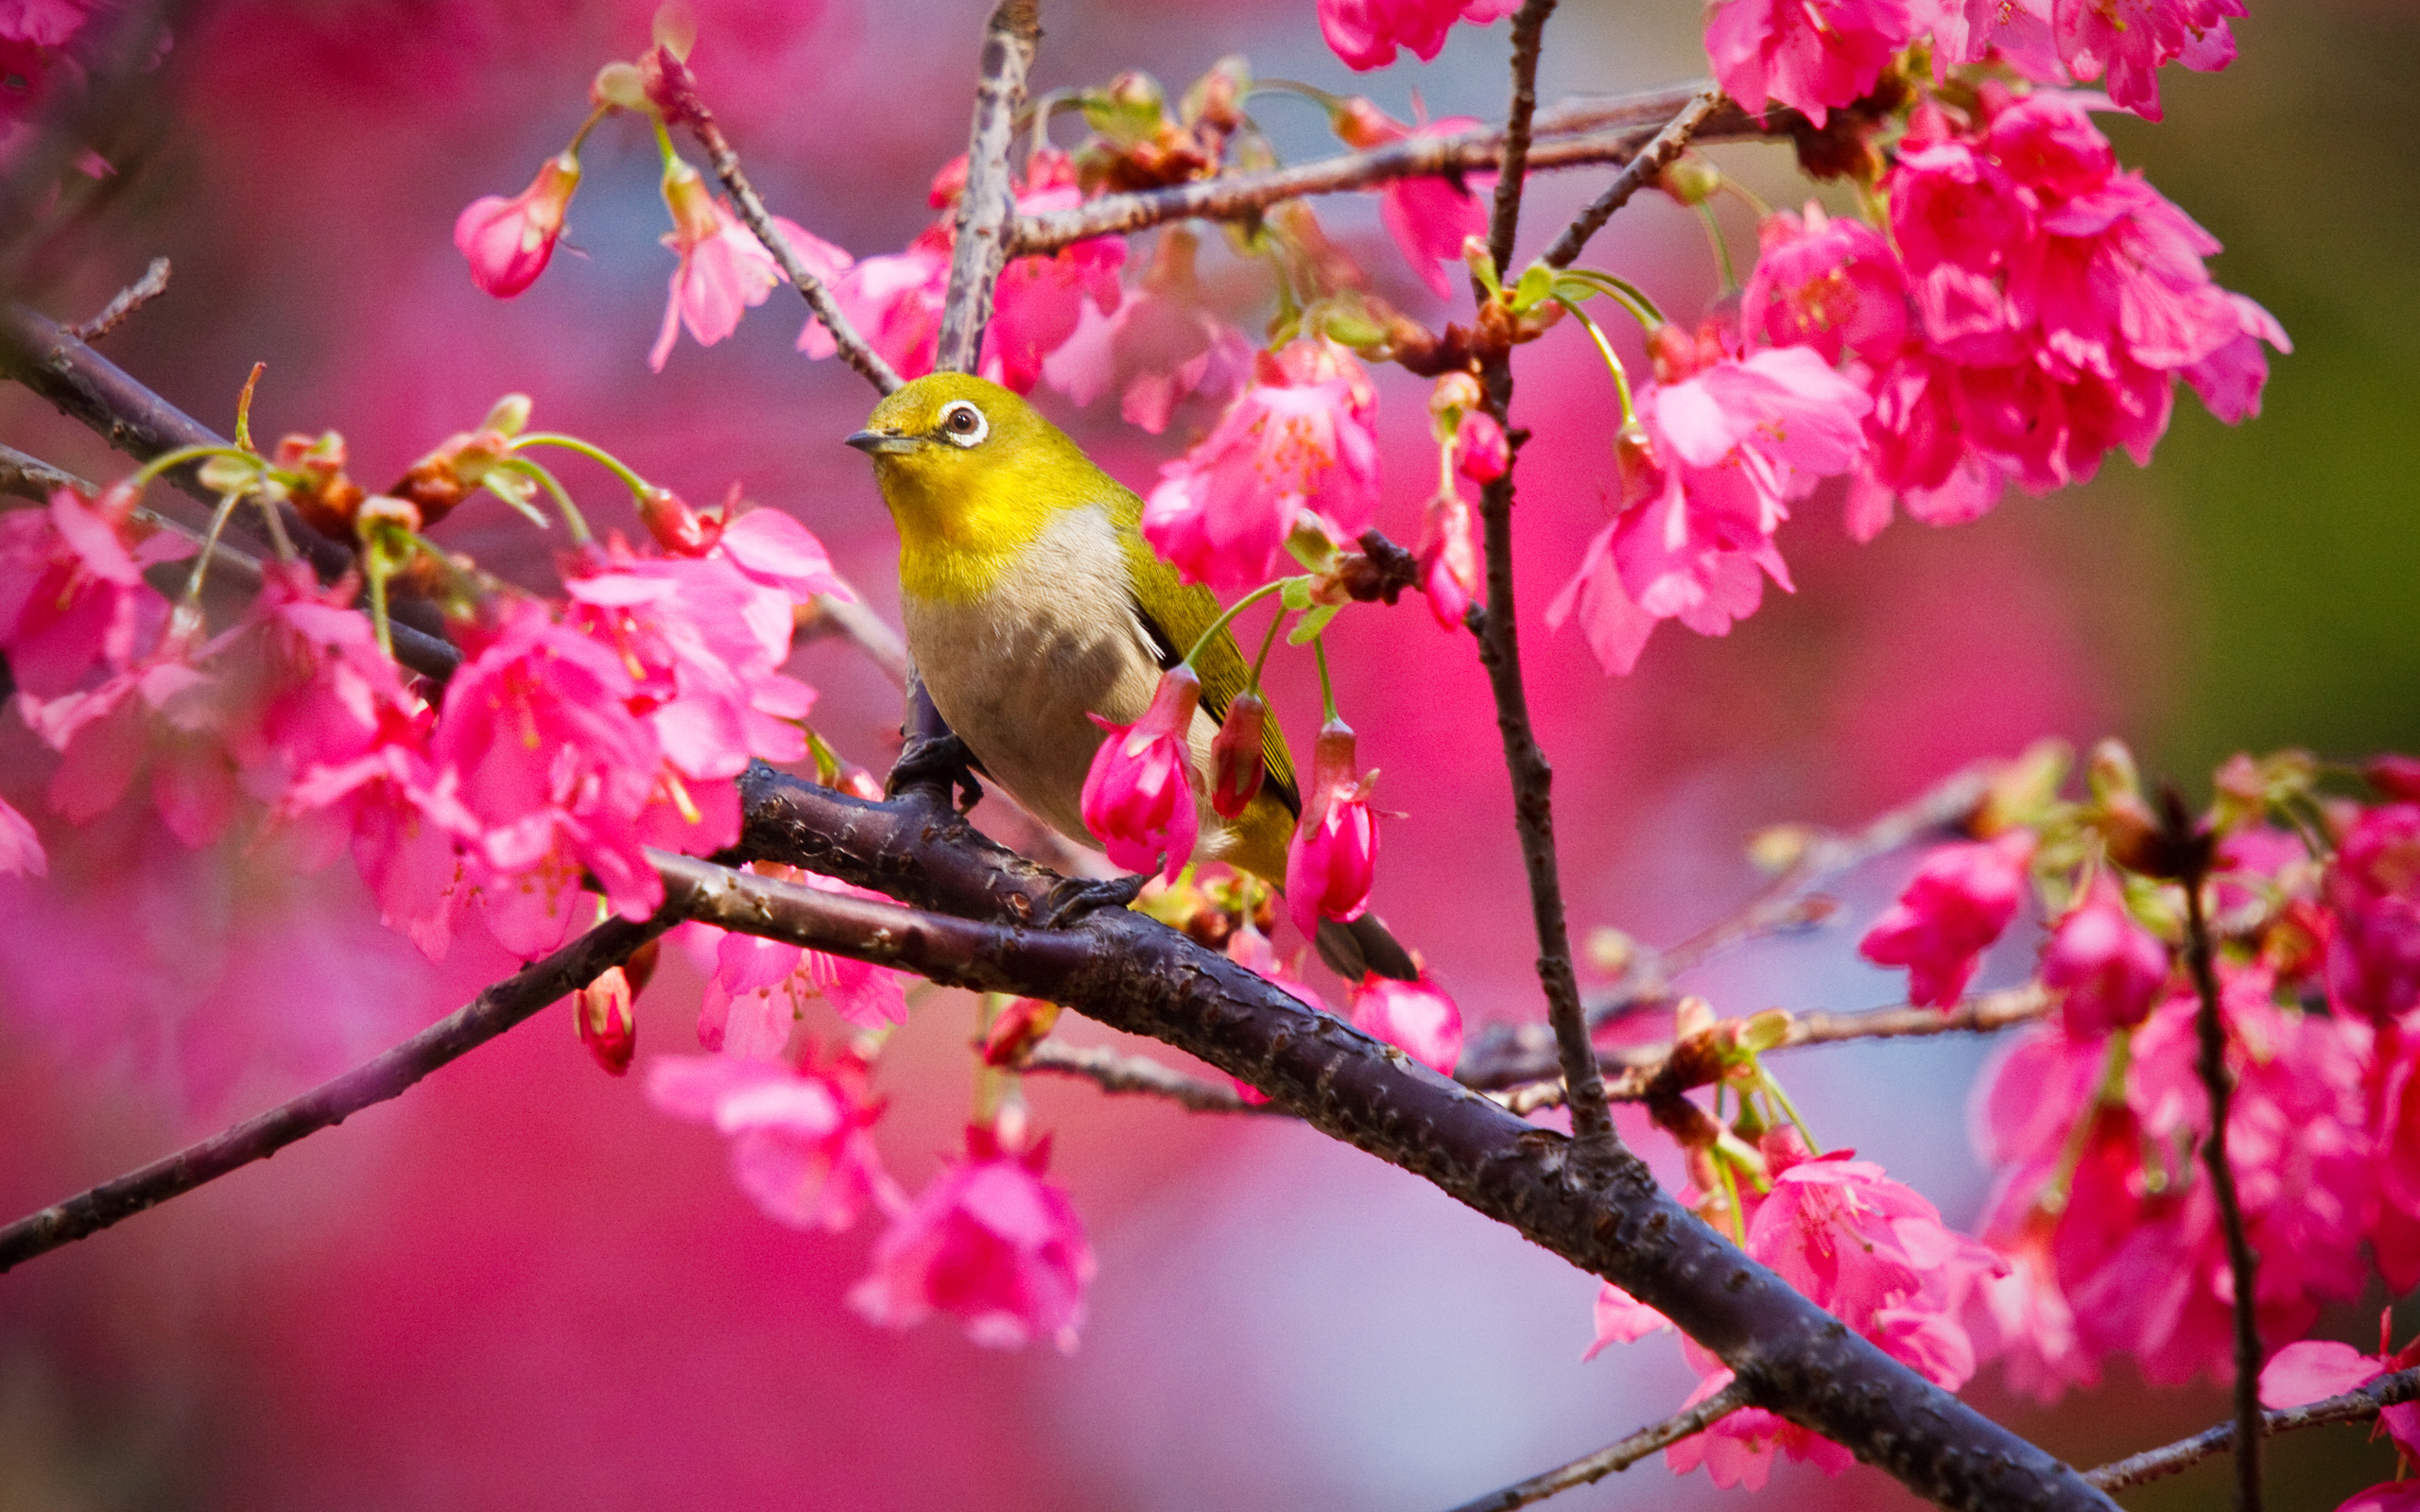 pretty wallppaer of animals a small yellow bird on the branch of rose